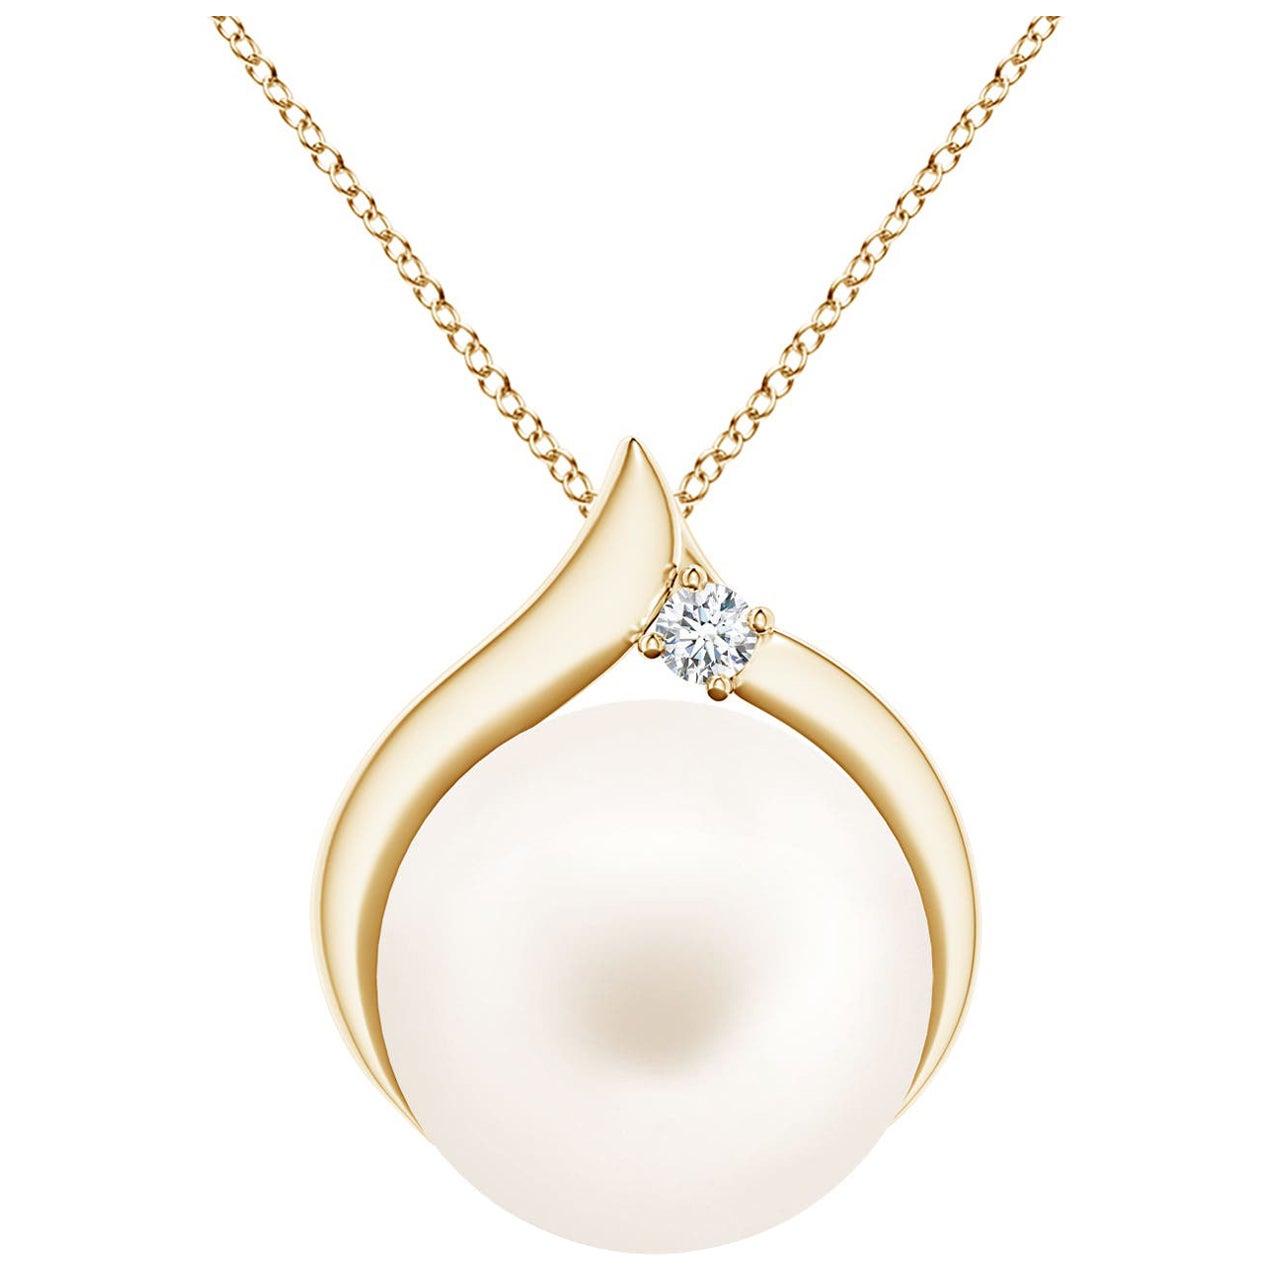 Freshwater Cultured Pearl Solitaire Pendant with Diamond in 14K Yellow Gold